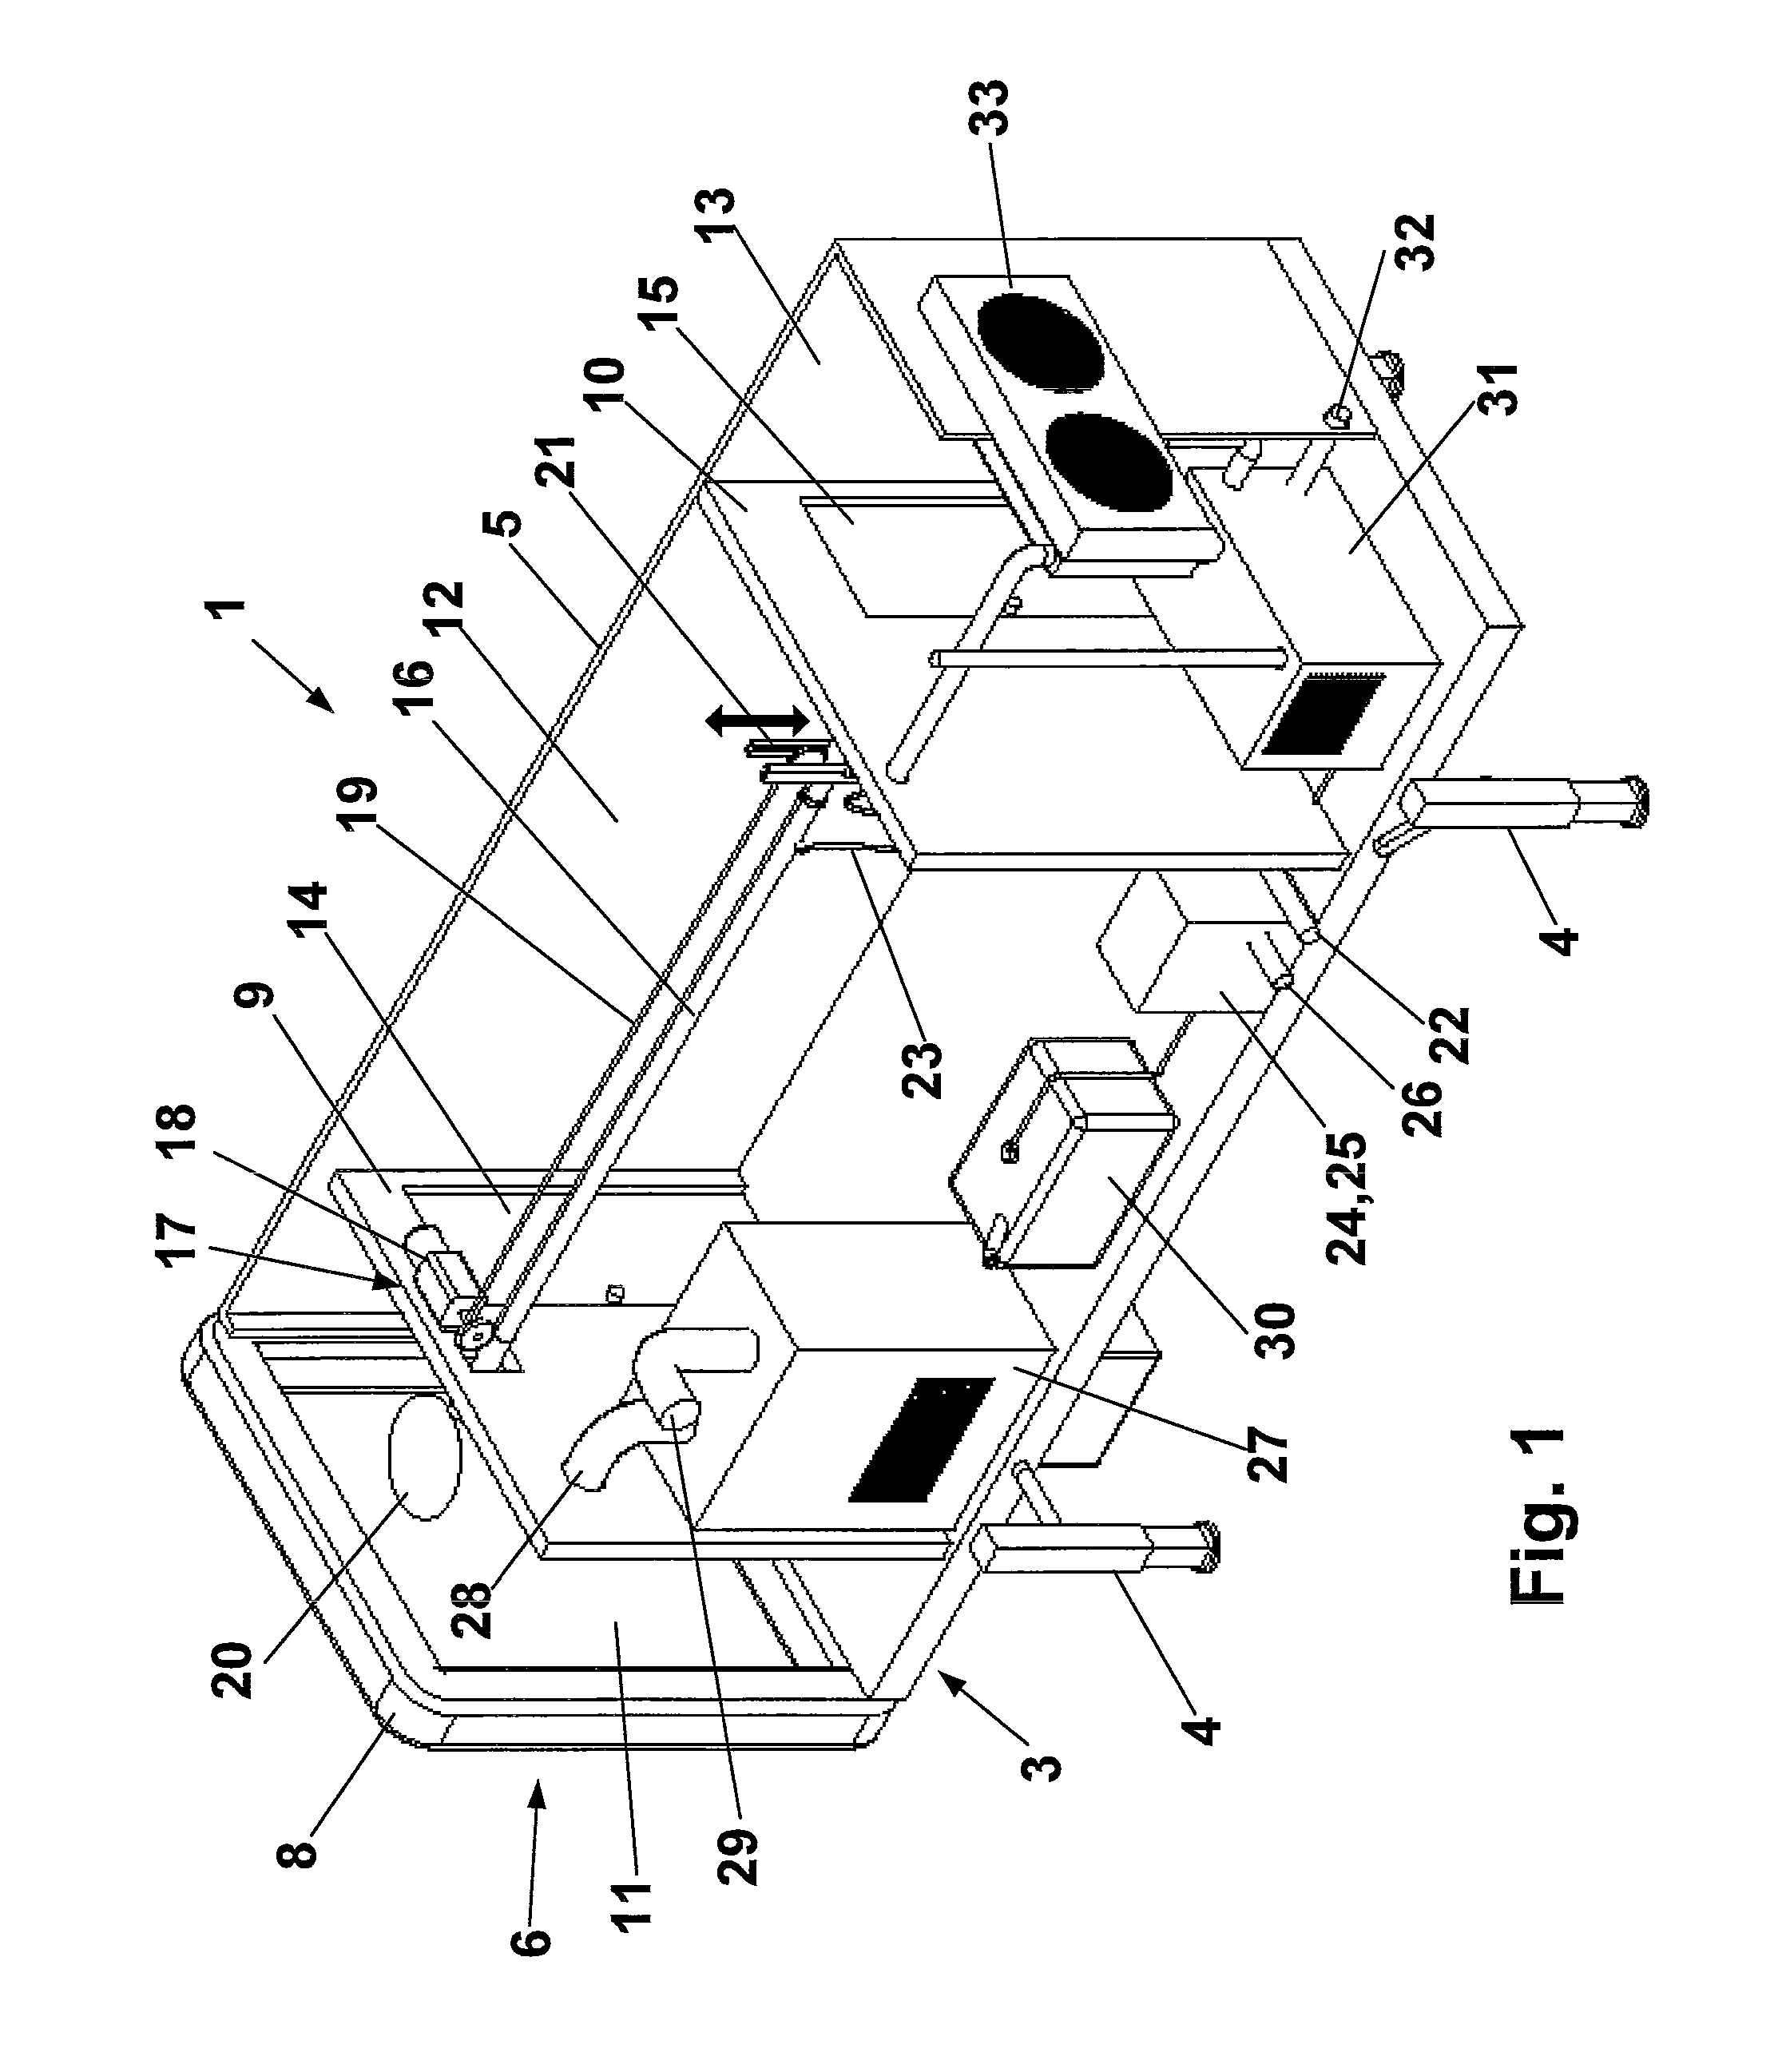 Loading and unloading device for cargo containers, silos and other vessels